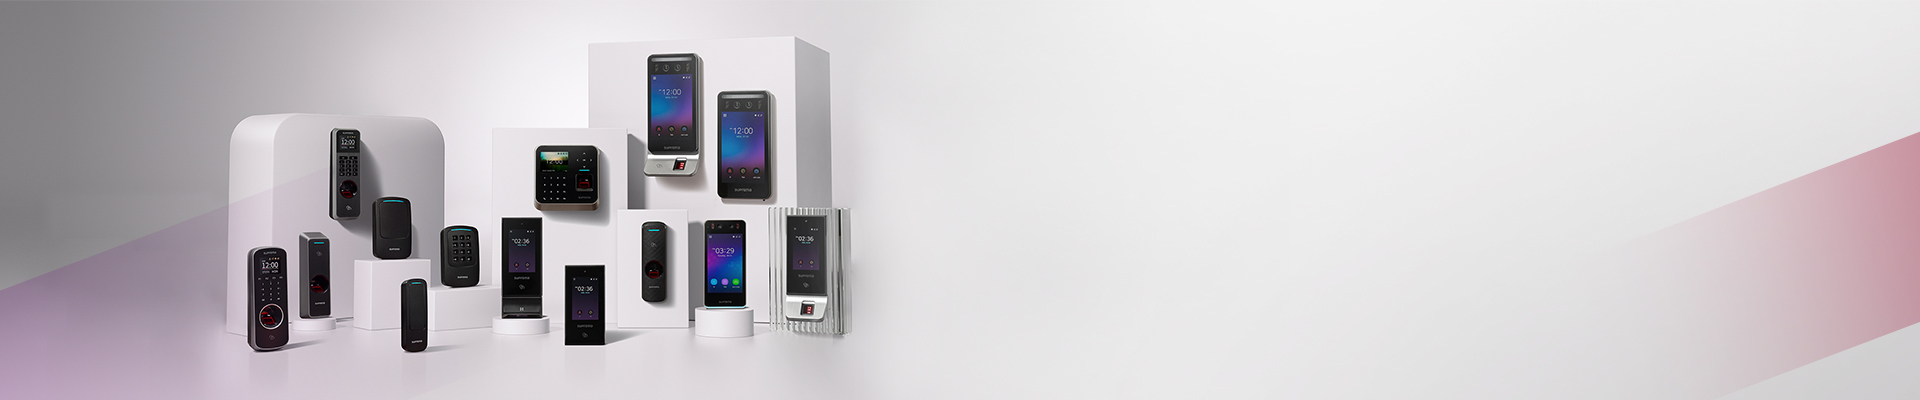 Suprema offers a variety of AI-powered access control solutions including biometrics, QR codes, and RFID cards.